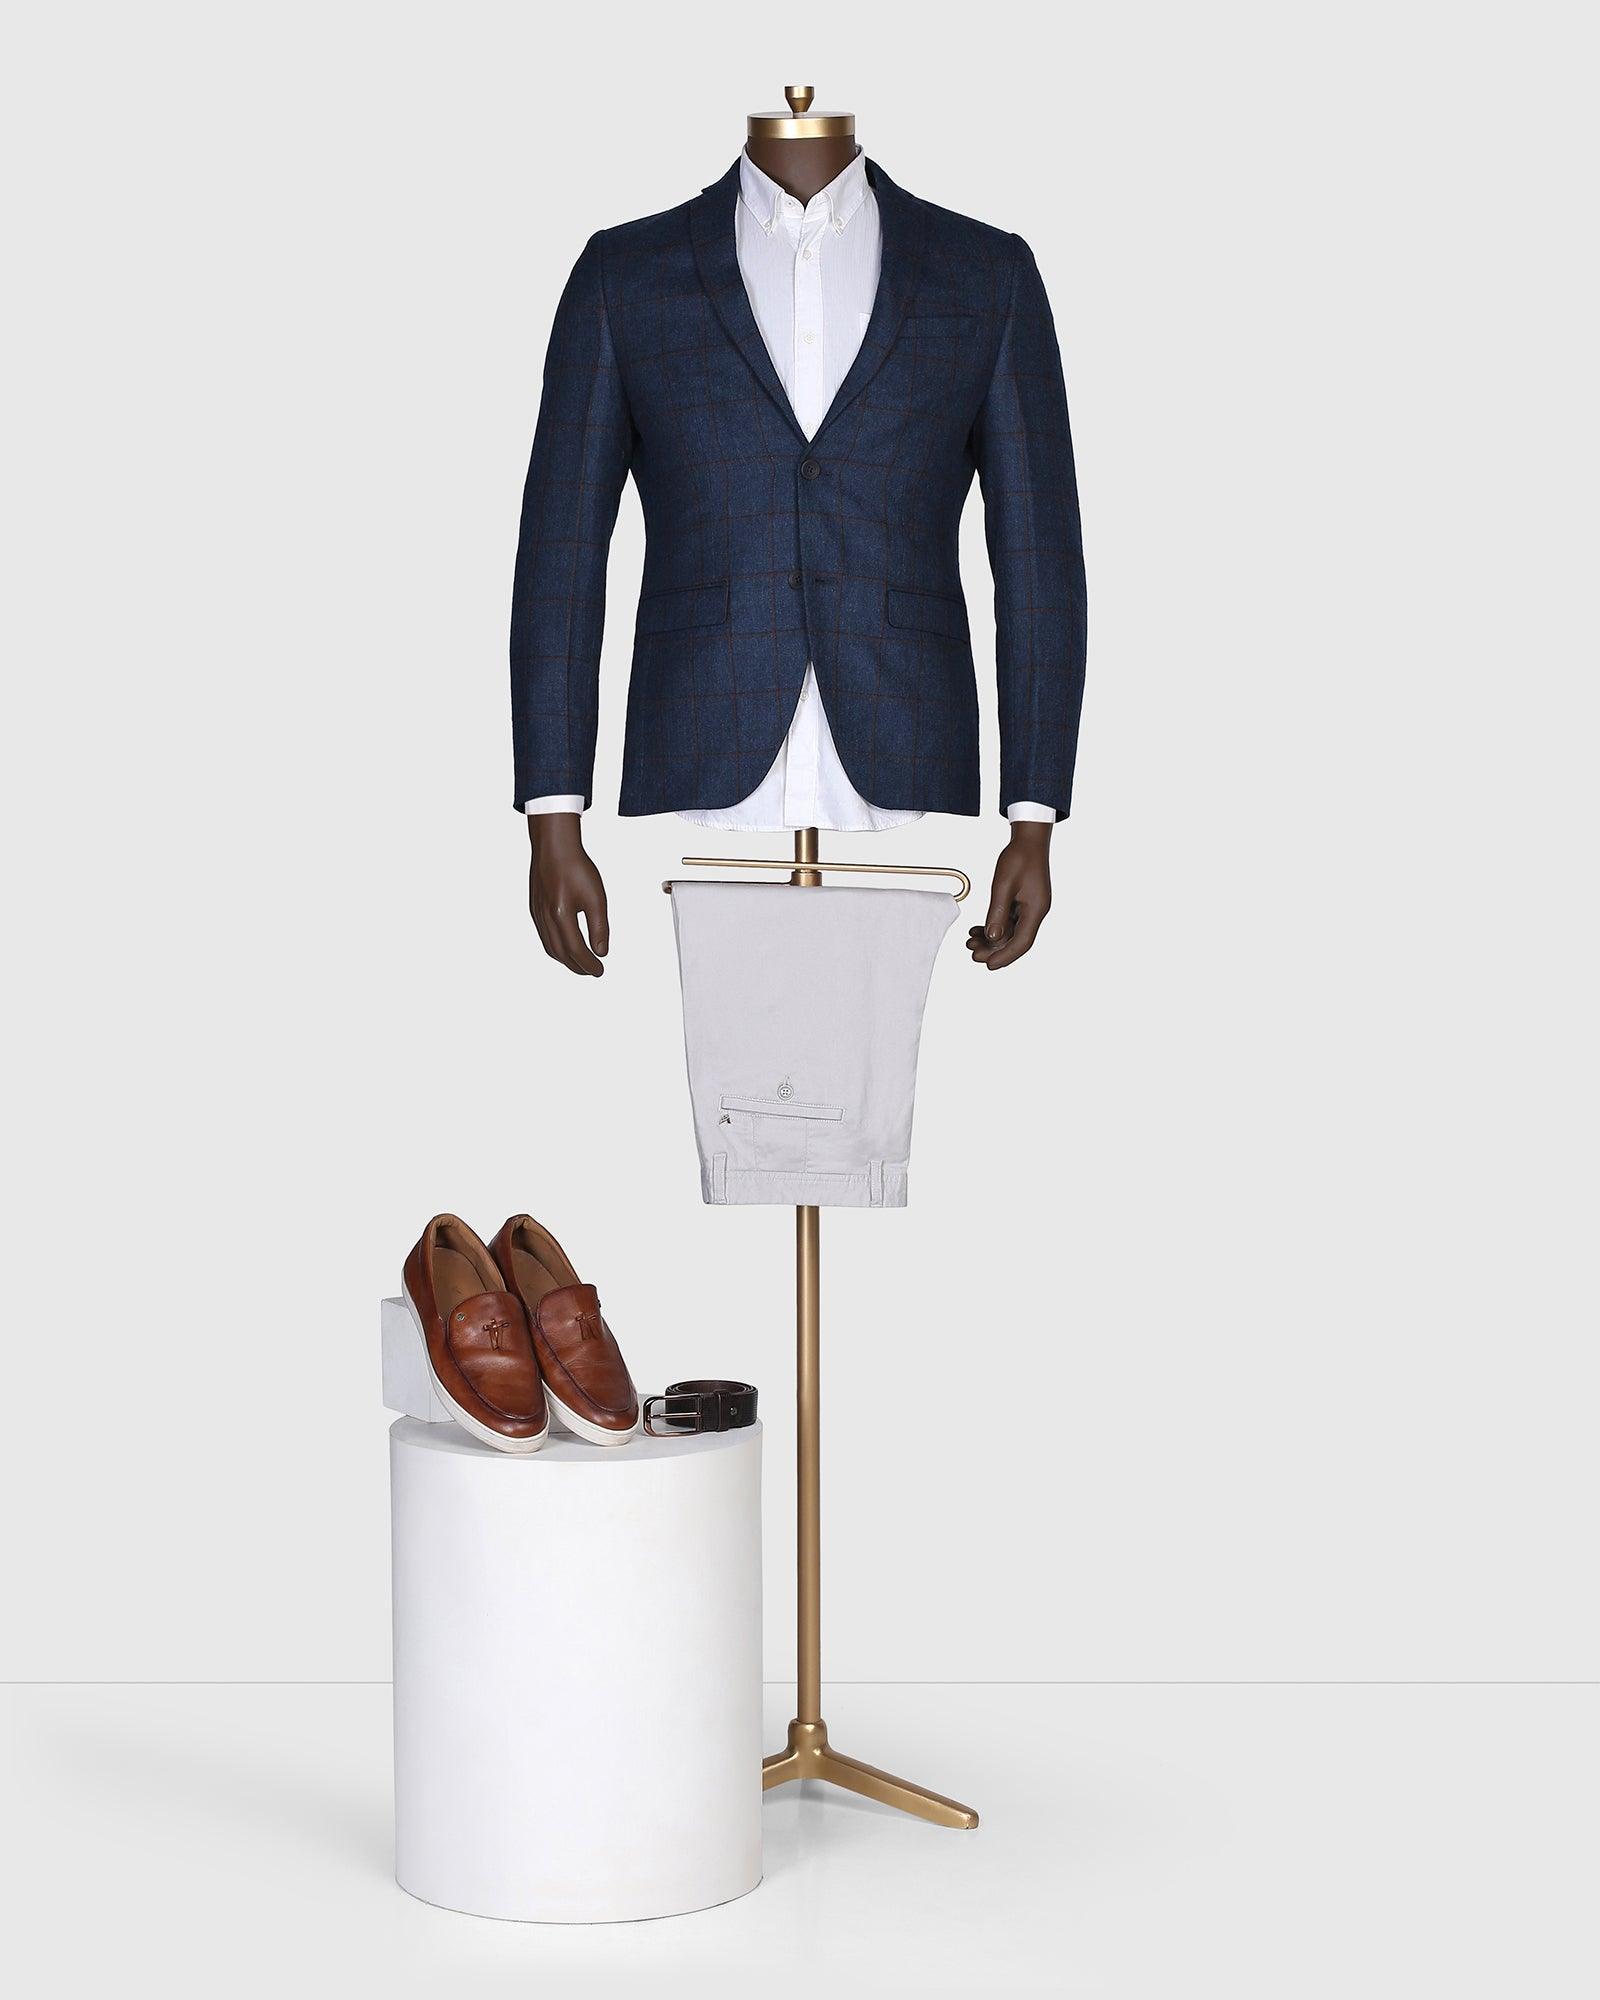 Navy Blazer  Cream Trousers A bunch of threads on what trousers go best  with a navy blazer httpwwwstyleforumnet  Navy blazer Cream  trousers Trousers